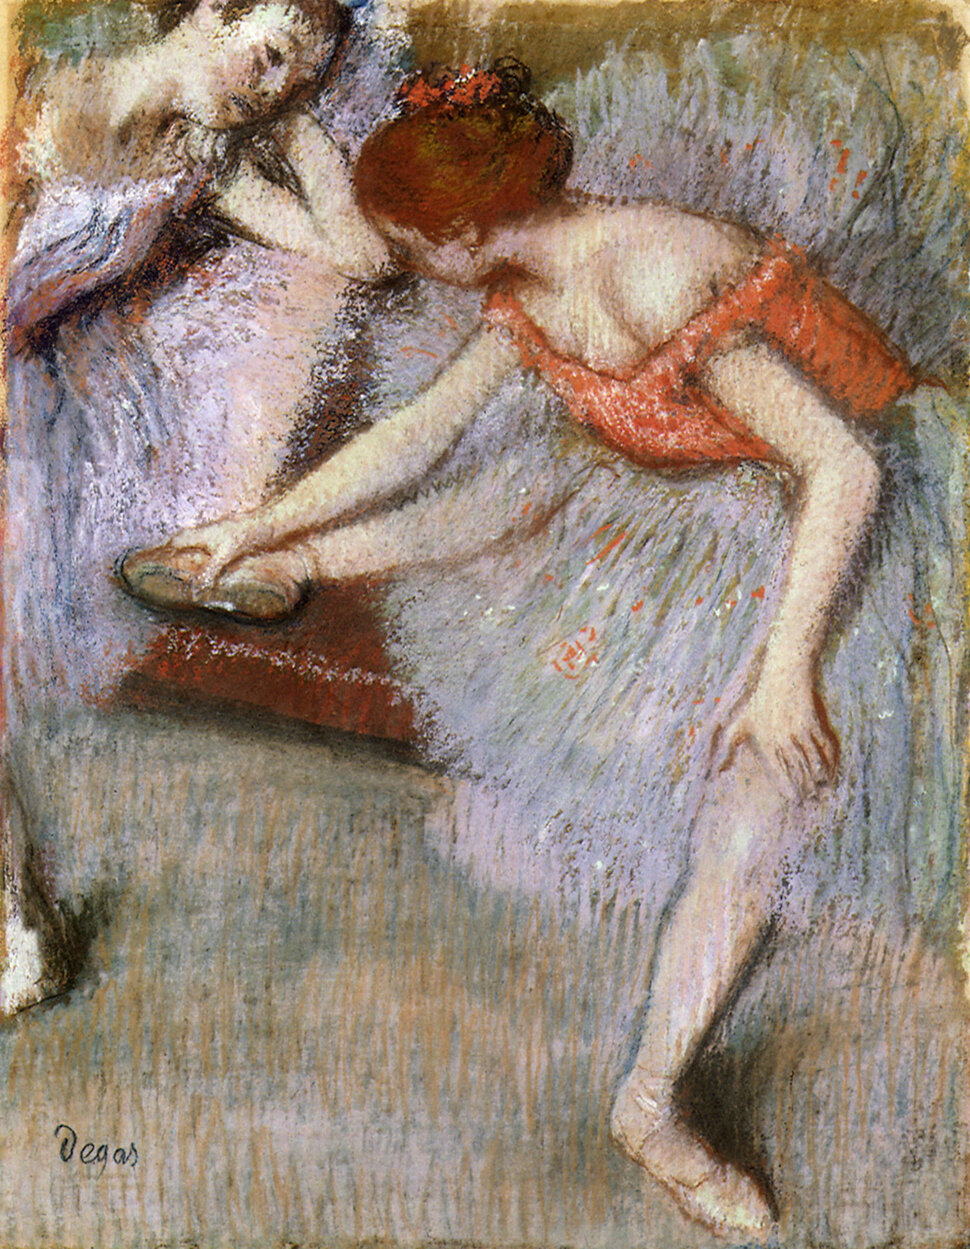 As an adult, Degas fraternized with few women aside from his housekeepers. His friends believed he feared&nbsp;women would in